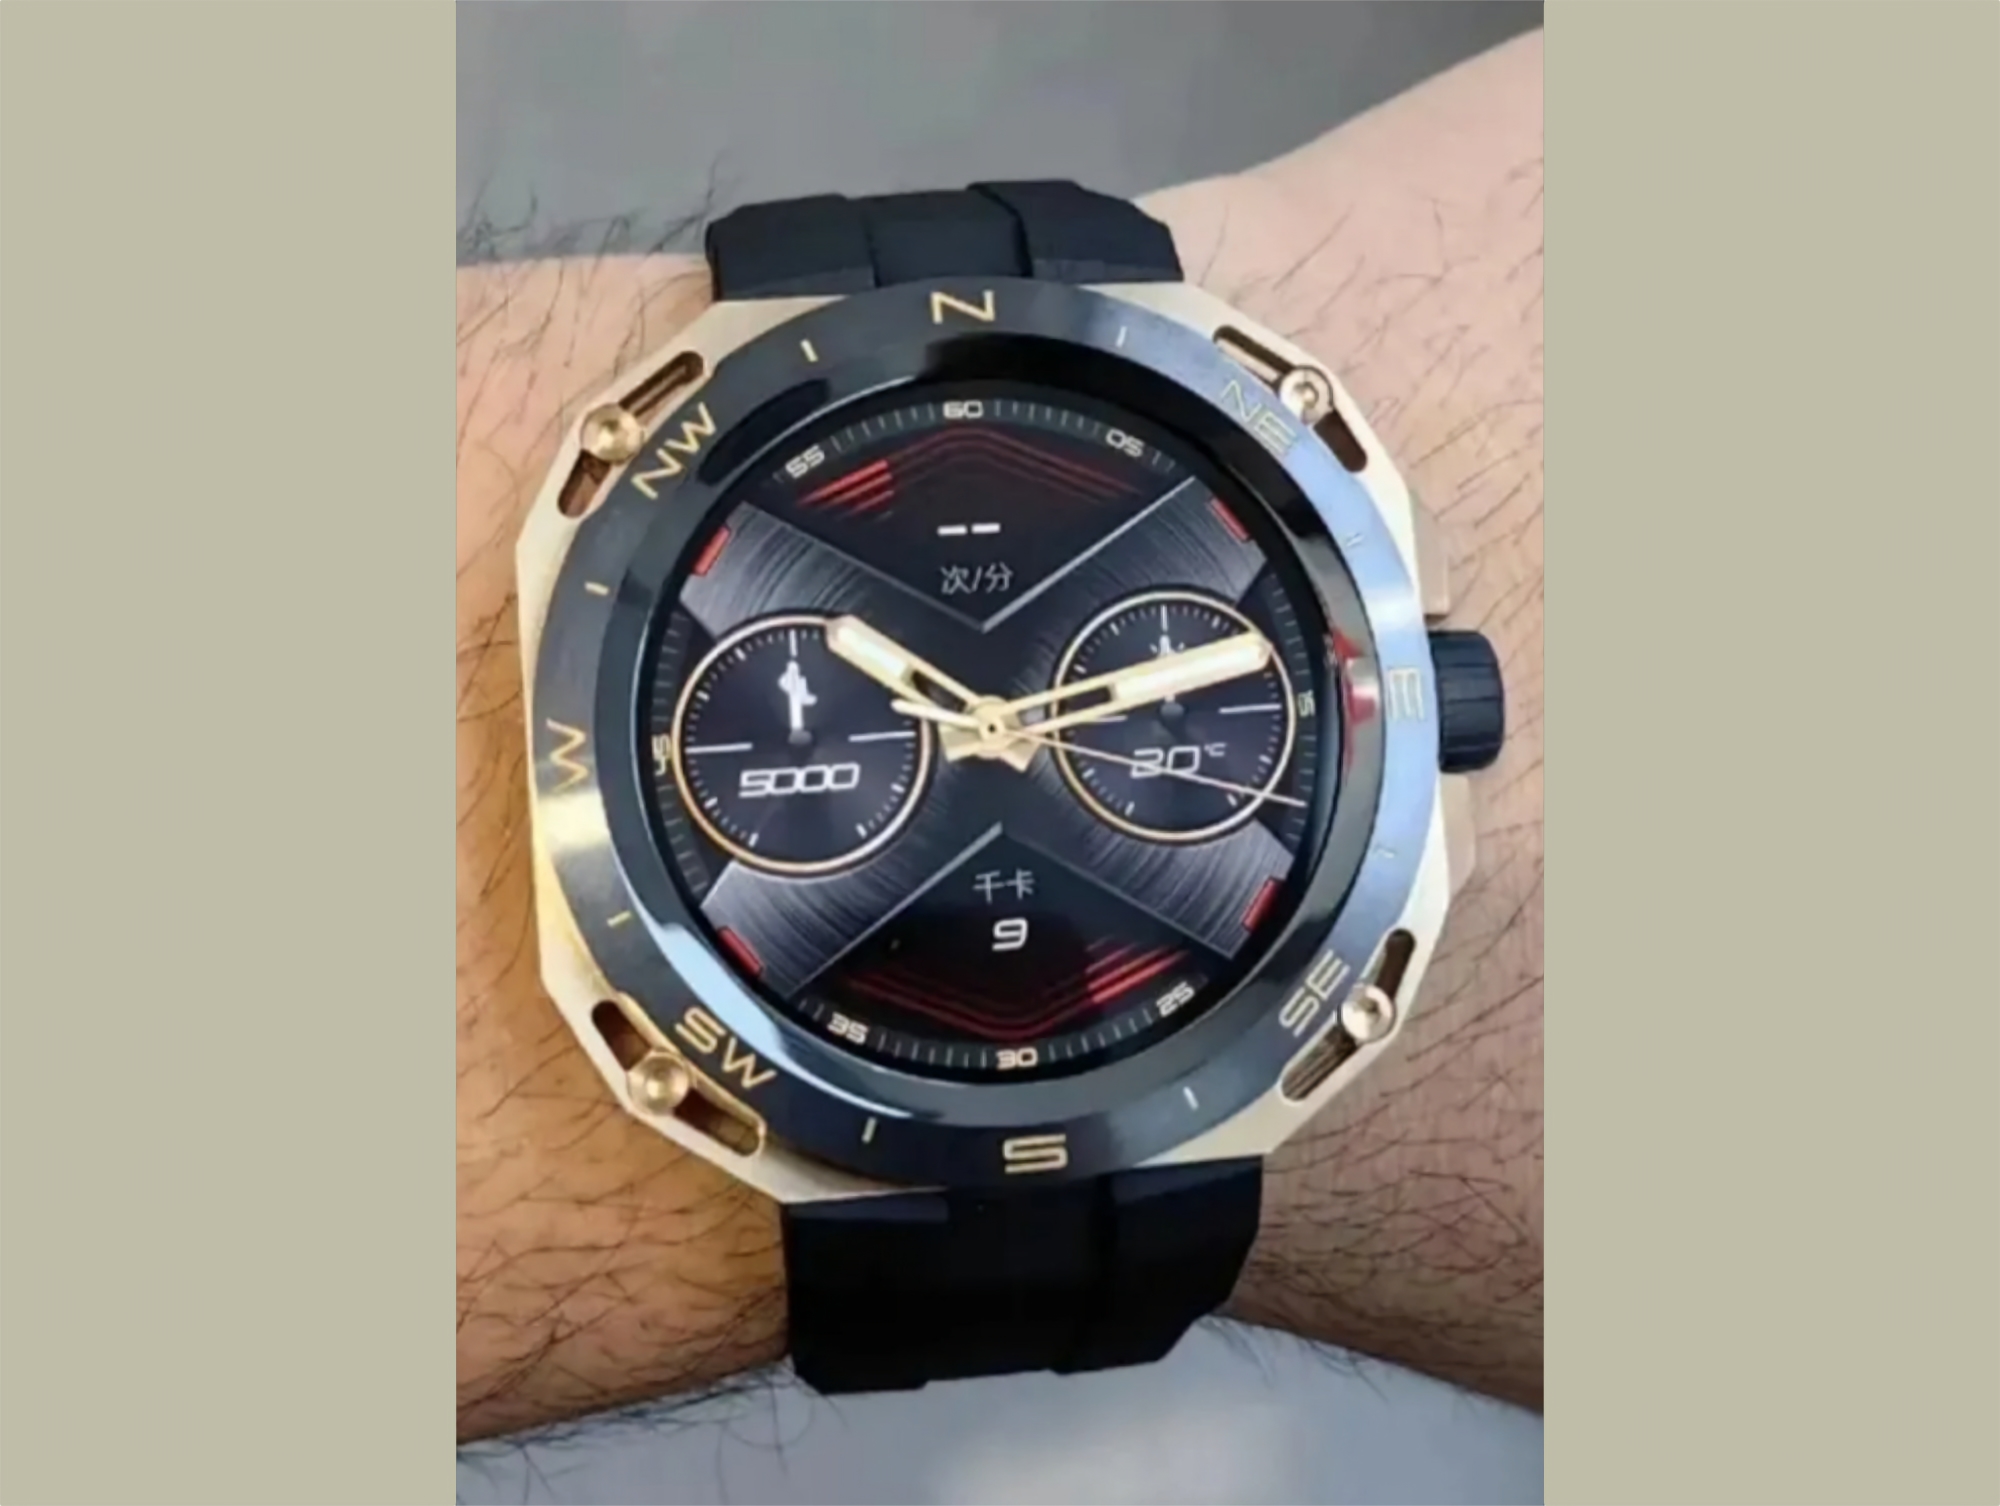 Here's what the Huawei Watch GT Cyber will look like: a construction watch with a removable screen